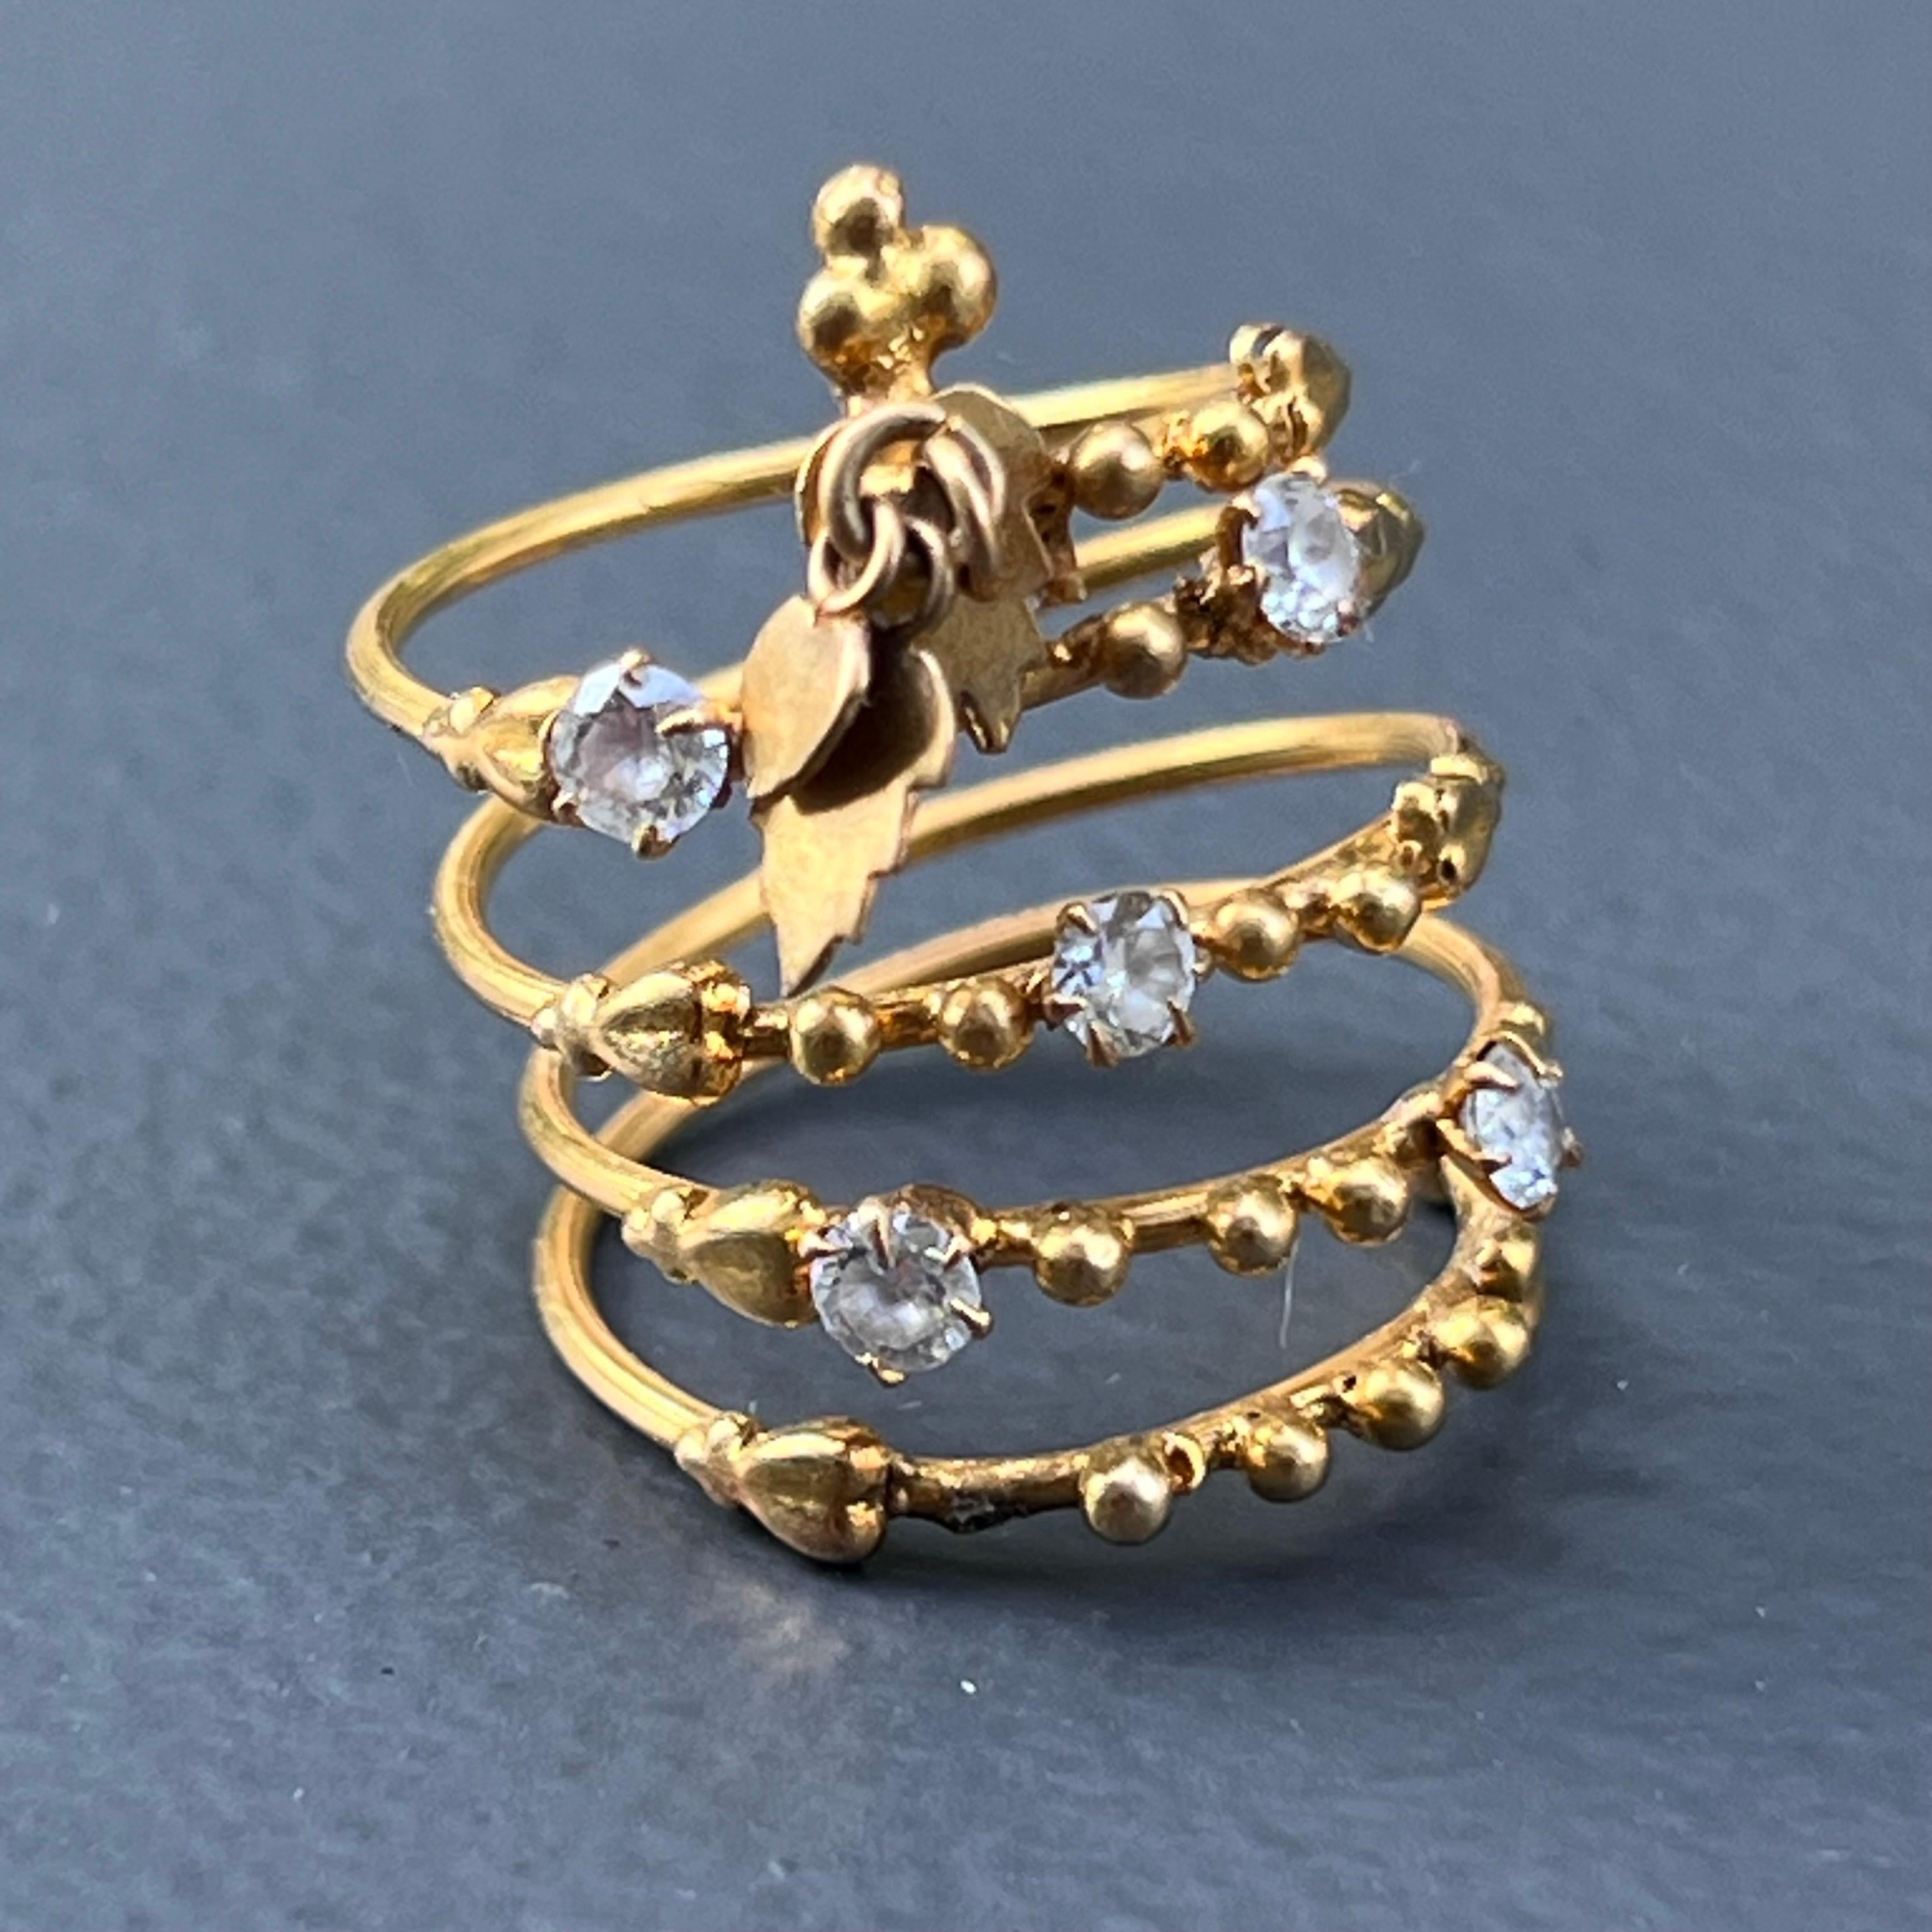  Unusual Mod/ Modern handmade 23 karat solid gold coiled ring with prong set cubic zircons. Ring is handmade and has four coils with fine details and features Etruscan style applied small ball beads and two cute dangles /charms on front side .